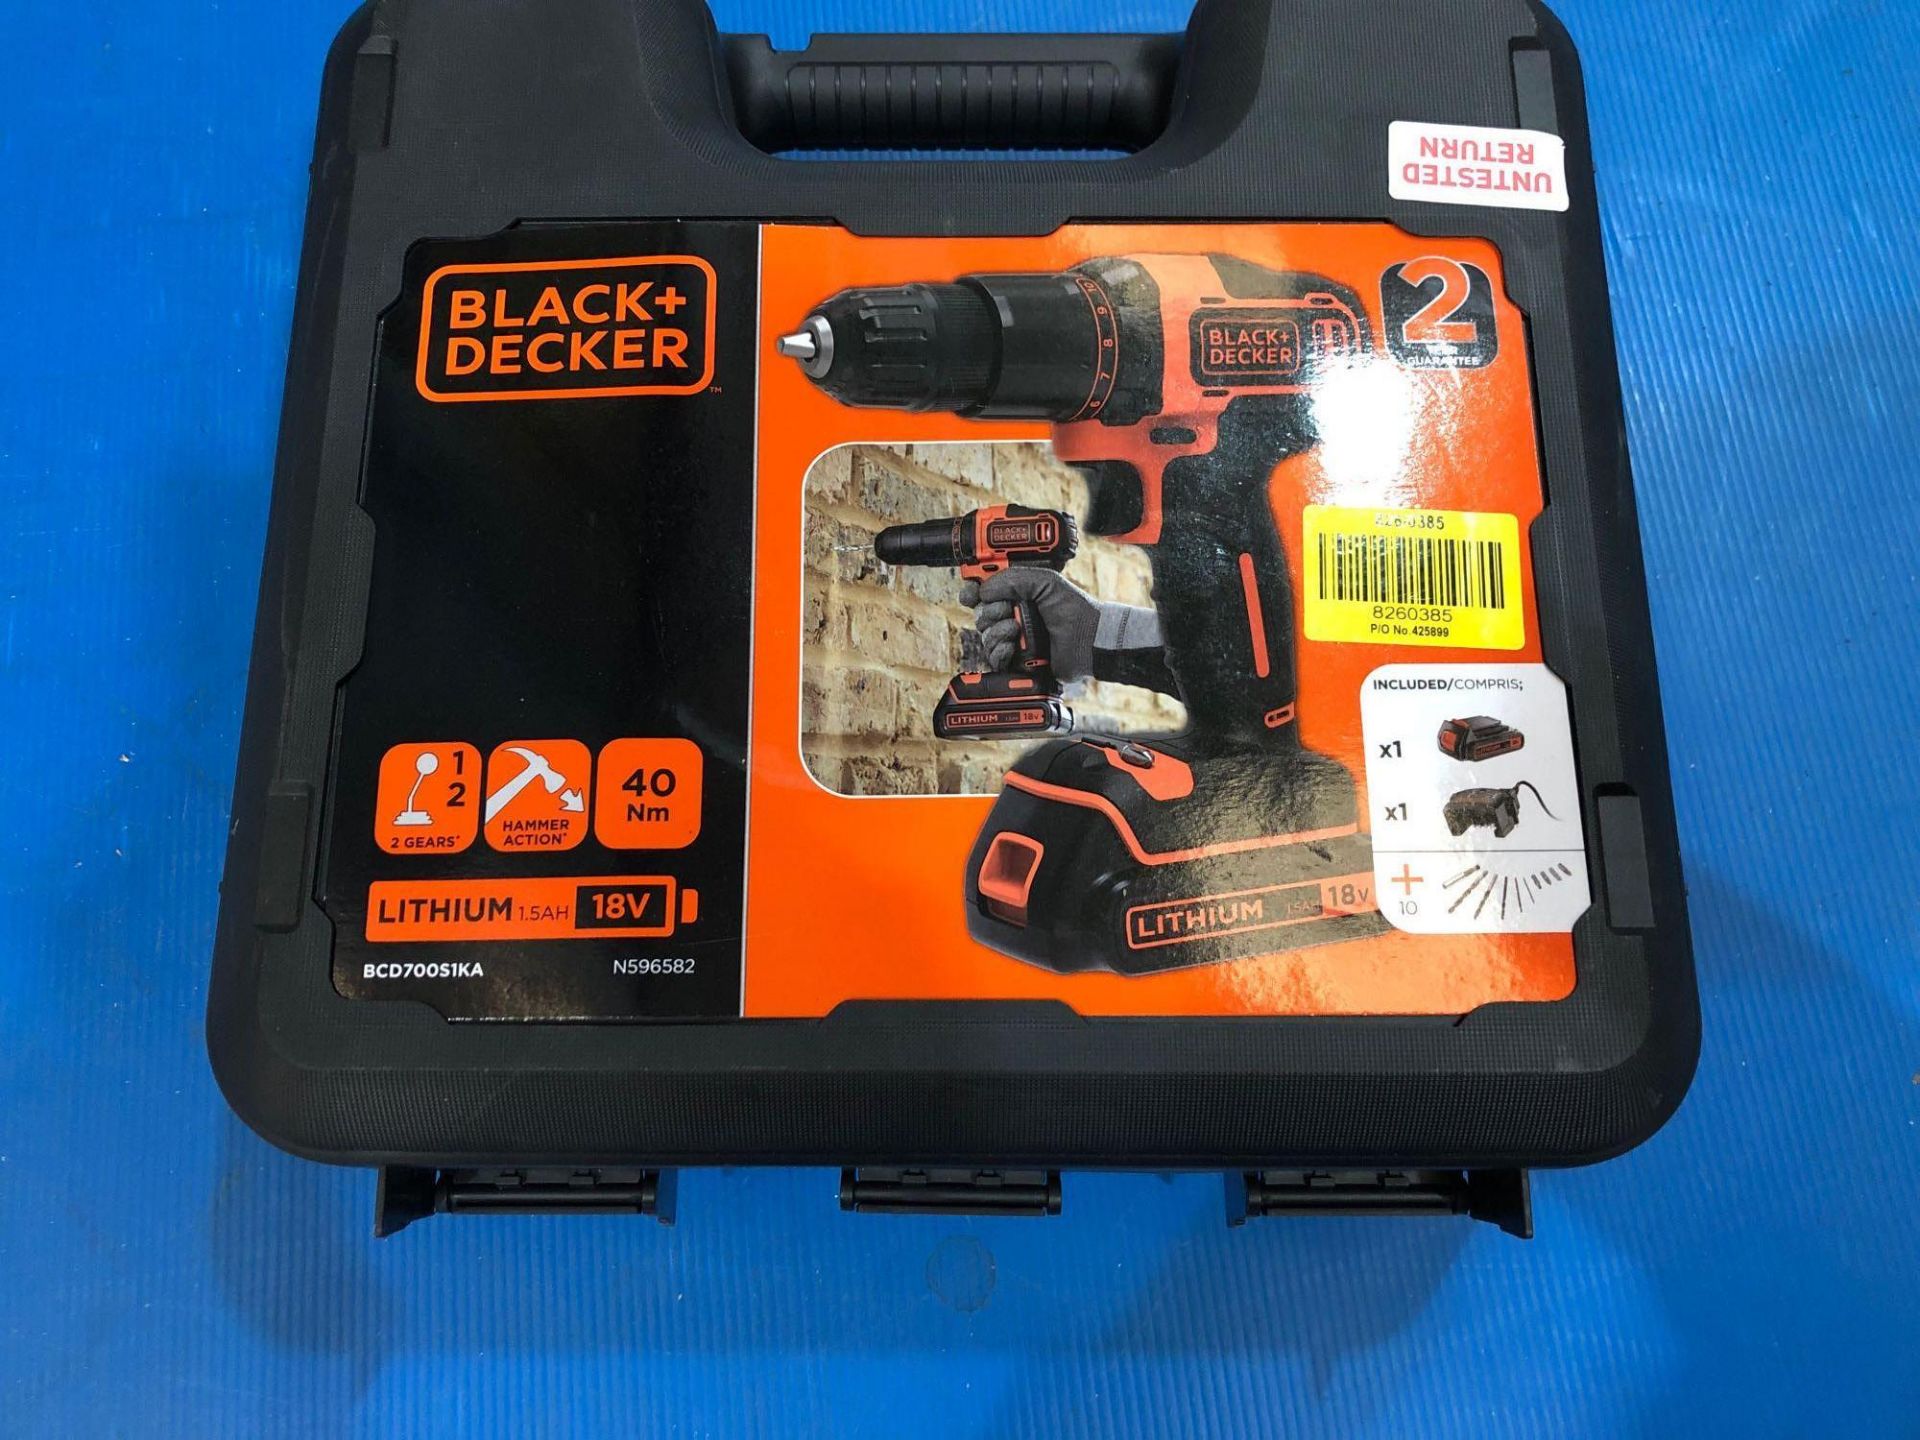 Black + Decker Cordless Hammer Drill with Battery - 18V, £50.00 RRP - Image 2 of 6